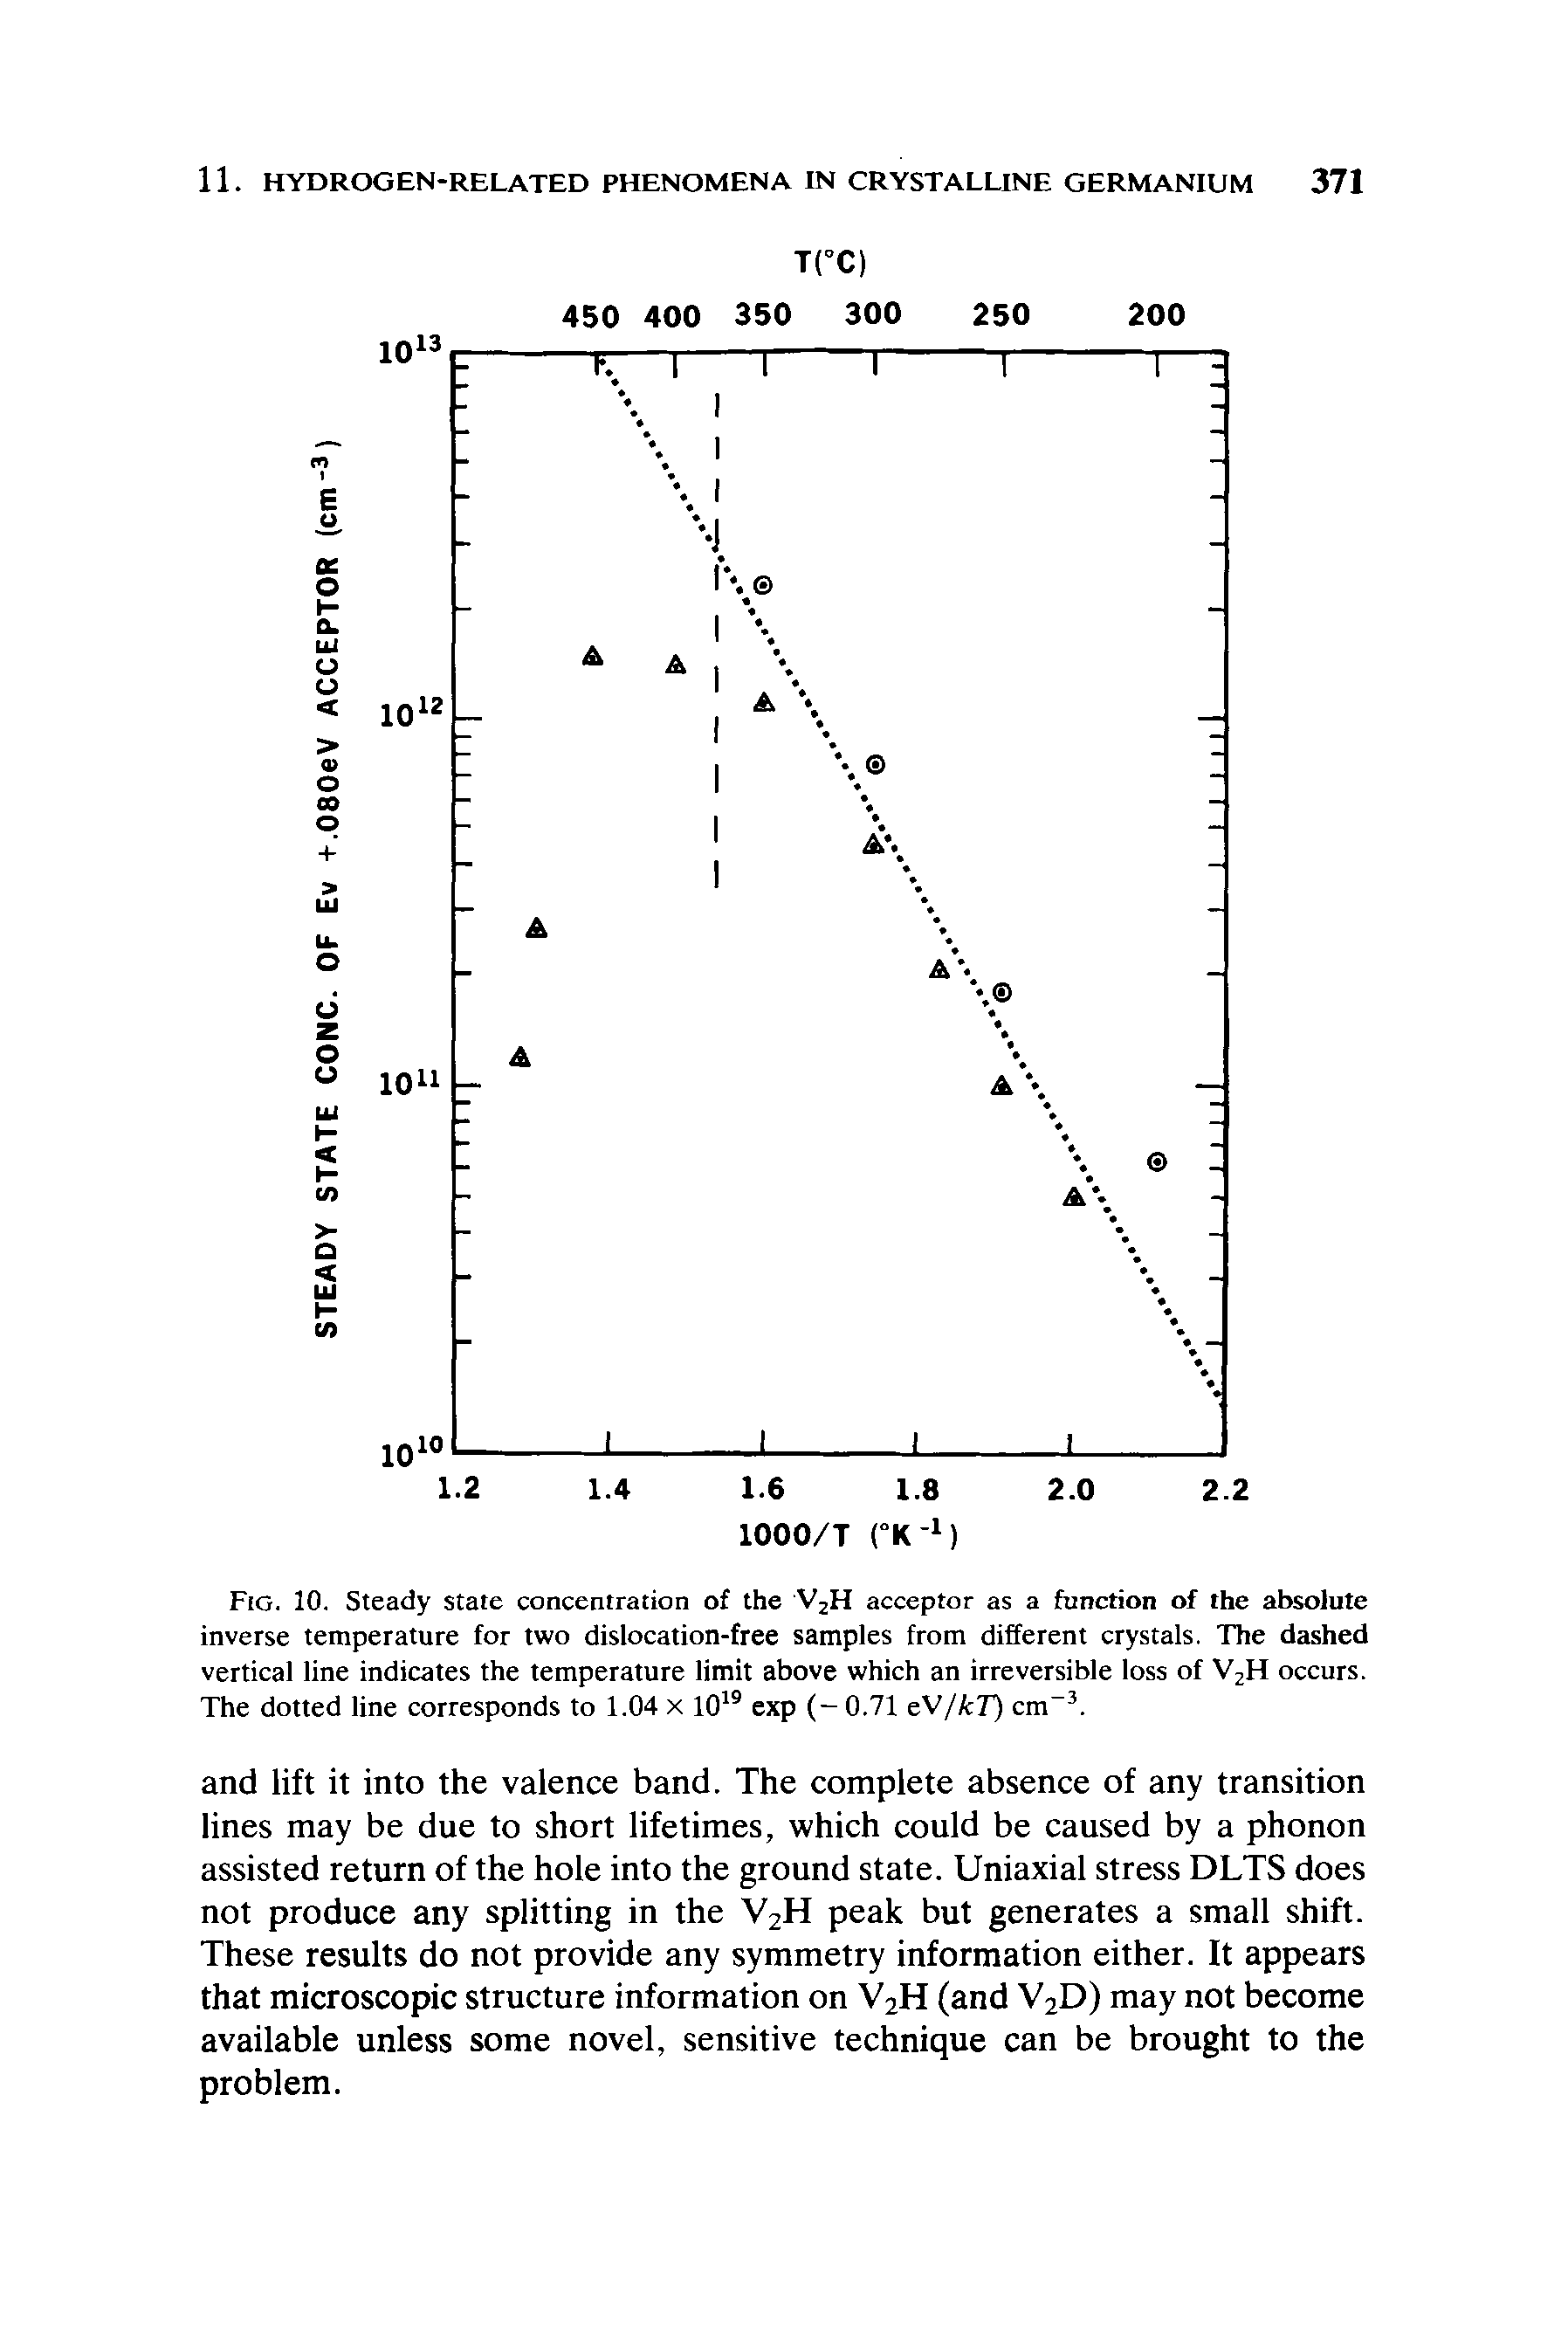 Fig. 10. Steady state concentration of the V2H acceptor as a function of the absolute inverse temperature for two dislocation-free samples from different crystals. The dashed vertical line indicates the temperature limit above which an irreversible loss of V2H occurs. The dotted line corresponds to 1.04 x 1019 exp (- 0.71 eV/kT) cm-3.